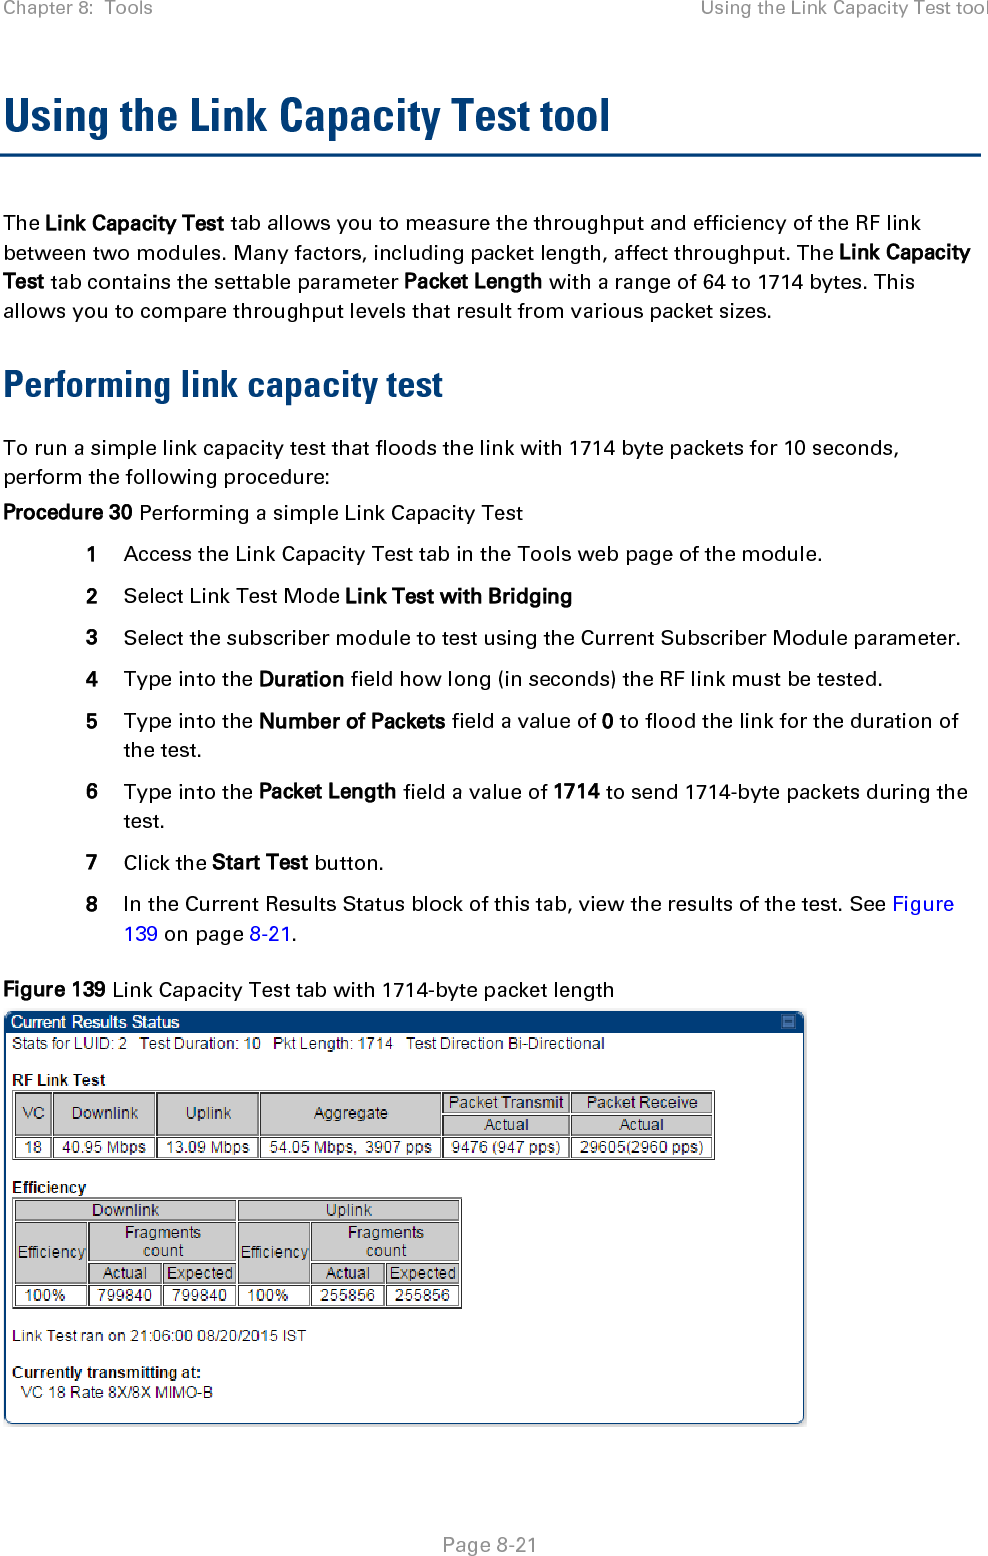 Chapter 8:  Tools Using the Link Capacity Test tool   Page 8-21 Using the Link Capacity Test tool The Link Capacity Test tab allows you to measure the throughput and efficiency of the RF link between two modules. Many factors, including packet length, affect throughput. The Link Capacity Test tab contains the settable parameter Packet Length with a range of 64 to 1714 bytes. This allows you to compare throughput levels that result from various packet sizes. Performing link capacity test To run a simple link capacity test that floods the link with 1714 byte packets for 10 seconds, perform the following procedure: Procedure 30 Performing a simple Link Capacity Test 1 Access the Link Capacity Test tab in the Tools web page of the module. 2 Select Link Test Mode Link Test with Bridging 3 Select the subscriber module to test using the Current Subscriber Module parameter. 4 Type into the Duration field how long (in seconds) the RF link must be tested. 5 Type into the Number of Packets field a value of 0 to flood the link for the duration of the test. 6 Type into the Packet Length field a value of 1714 to send 1714-byte packets during the test. 7 Click the Start Test button. 8 In the Current Results Status block of this tab, view the results of the test. See Figure 139 on page 8-21. Figure 139 Link Capacity Test tab with 1714-byte packet length  